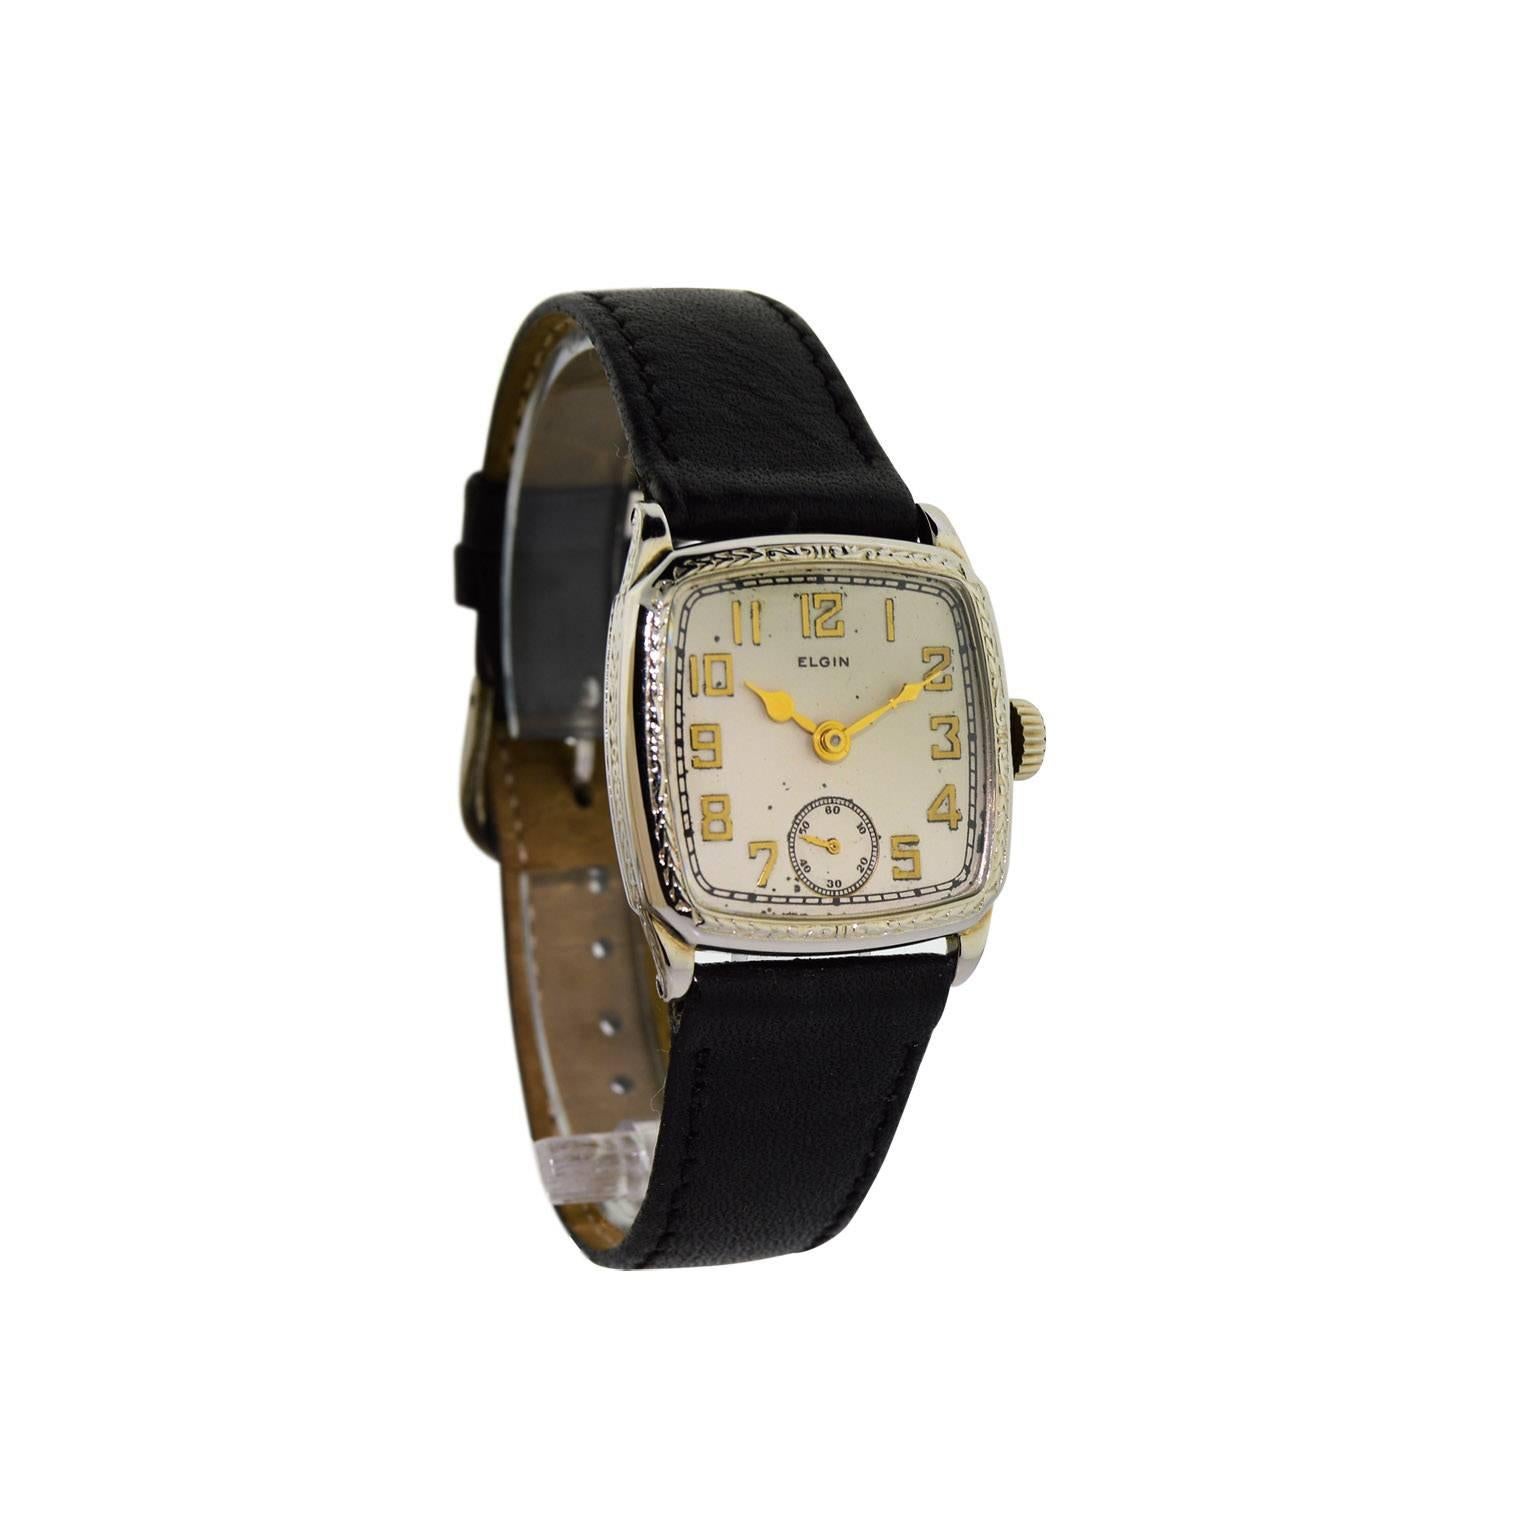 FACTORY / HOUSE: Elgin National Watch Company
STYLE / REFERENCE: Cushion Shaped / Engraved Bezel
METAL / MATERIAL: 14Kt. White Gold Filled 
CIRCA: 1929
DIMENSIONS: 37mm X 29mm
MOVEMENT / CALIBER: Manual Winding / 7 Jewels / Nickel Plates
DIAL /